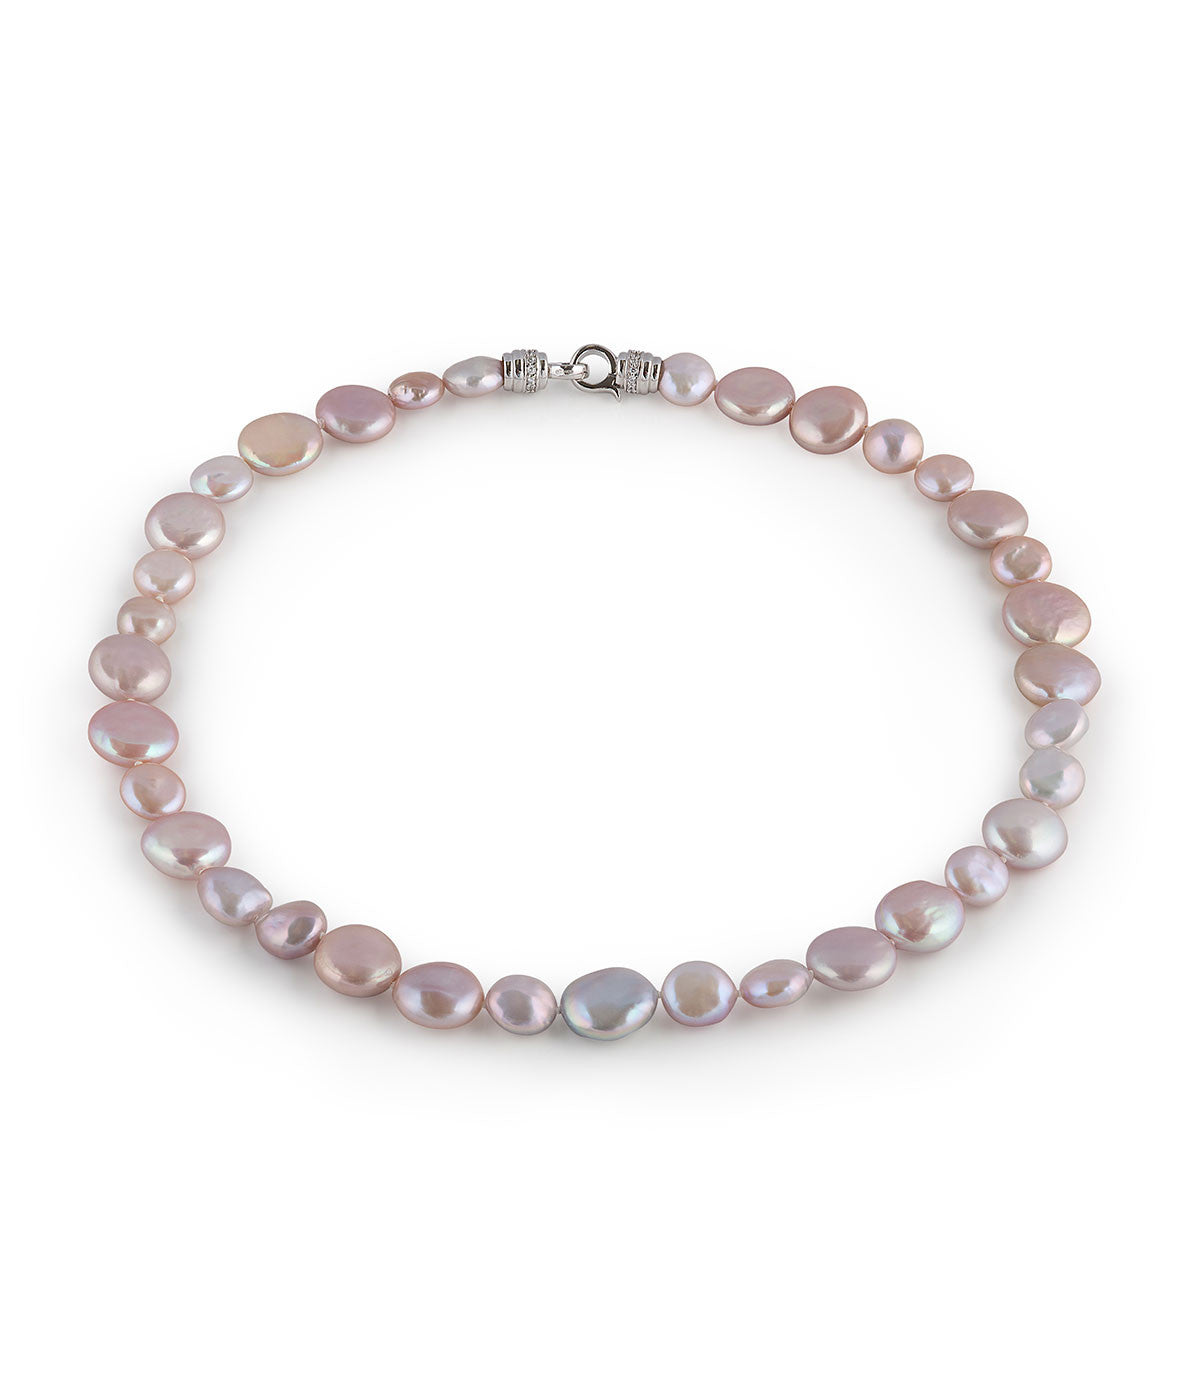 Modern Freshwater Pearl Necklace Pink Rhodium Plated Sterling Silver Clasp Cubic Zirconia